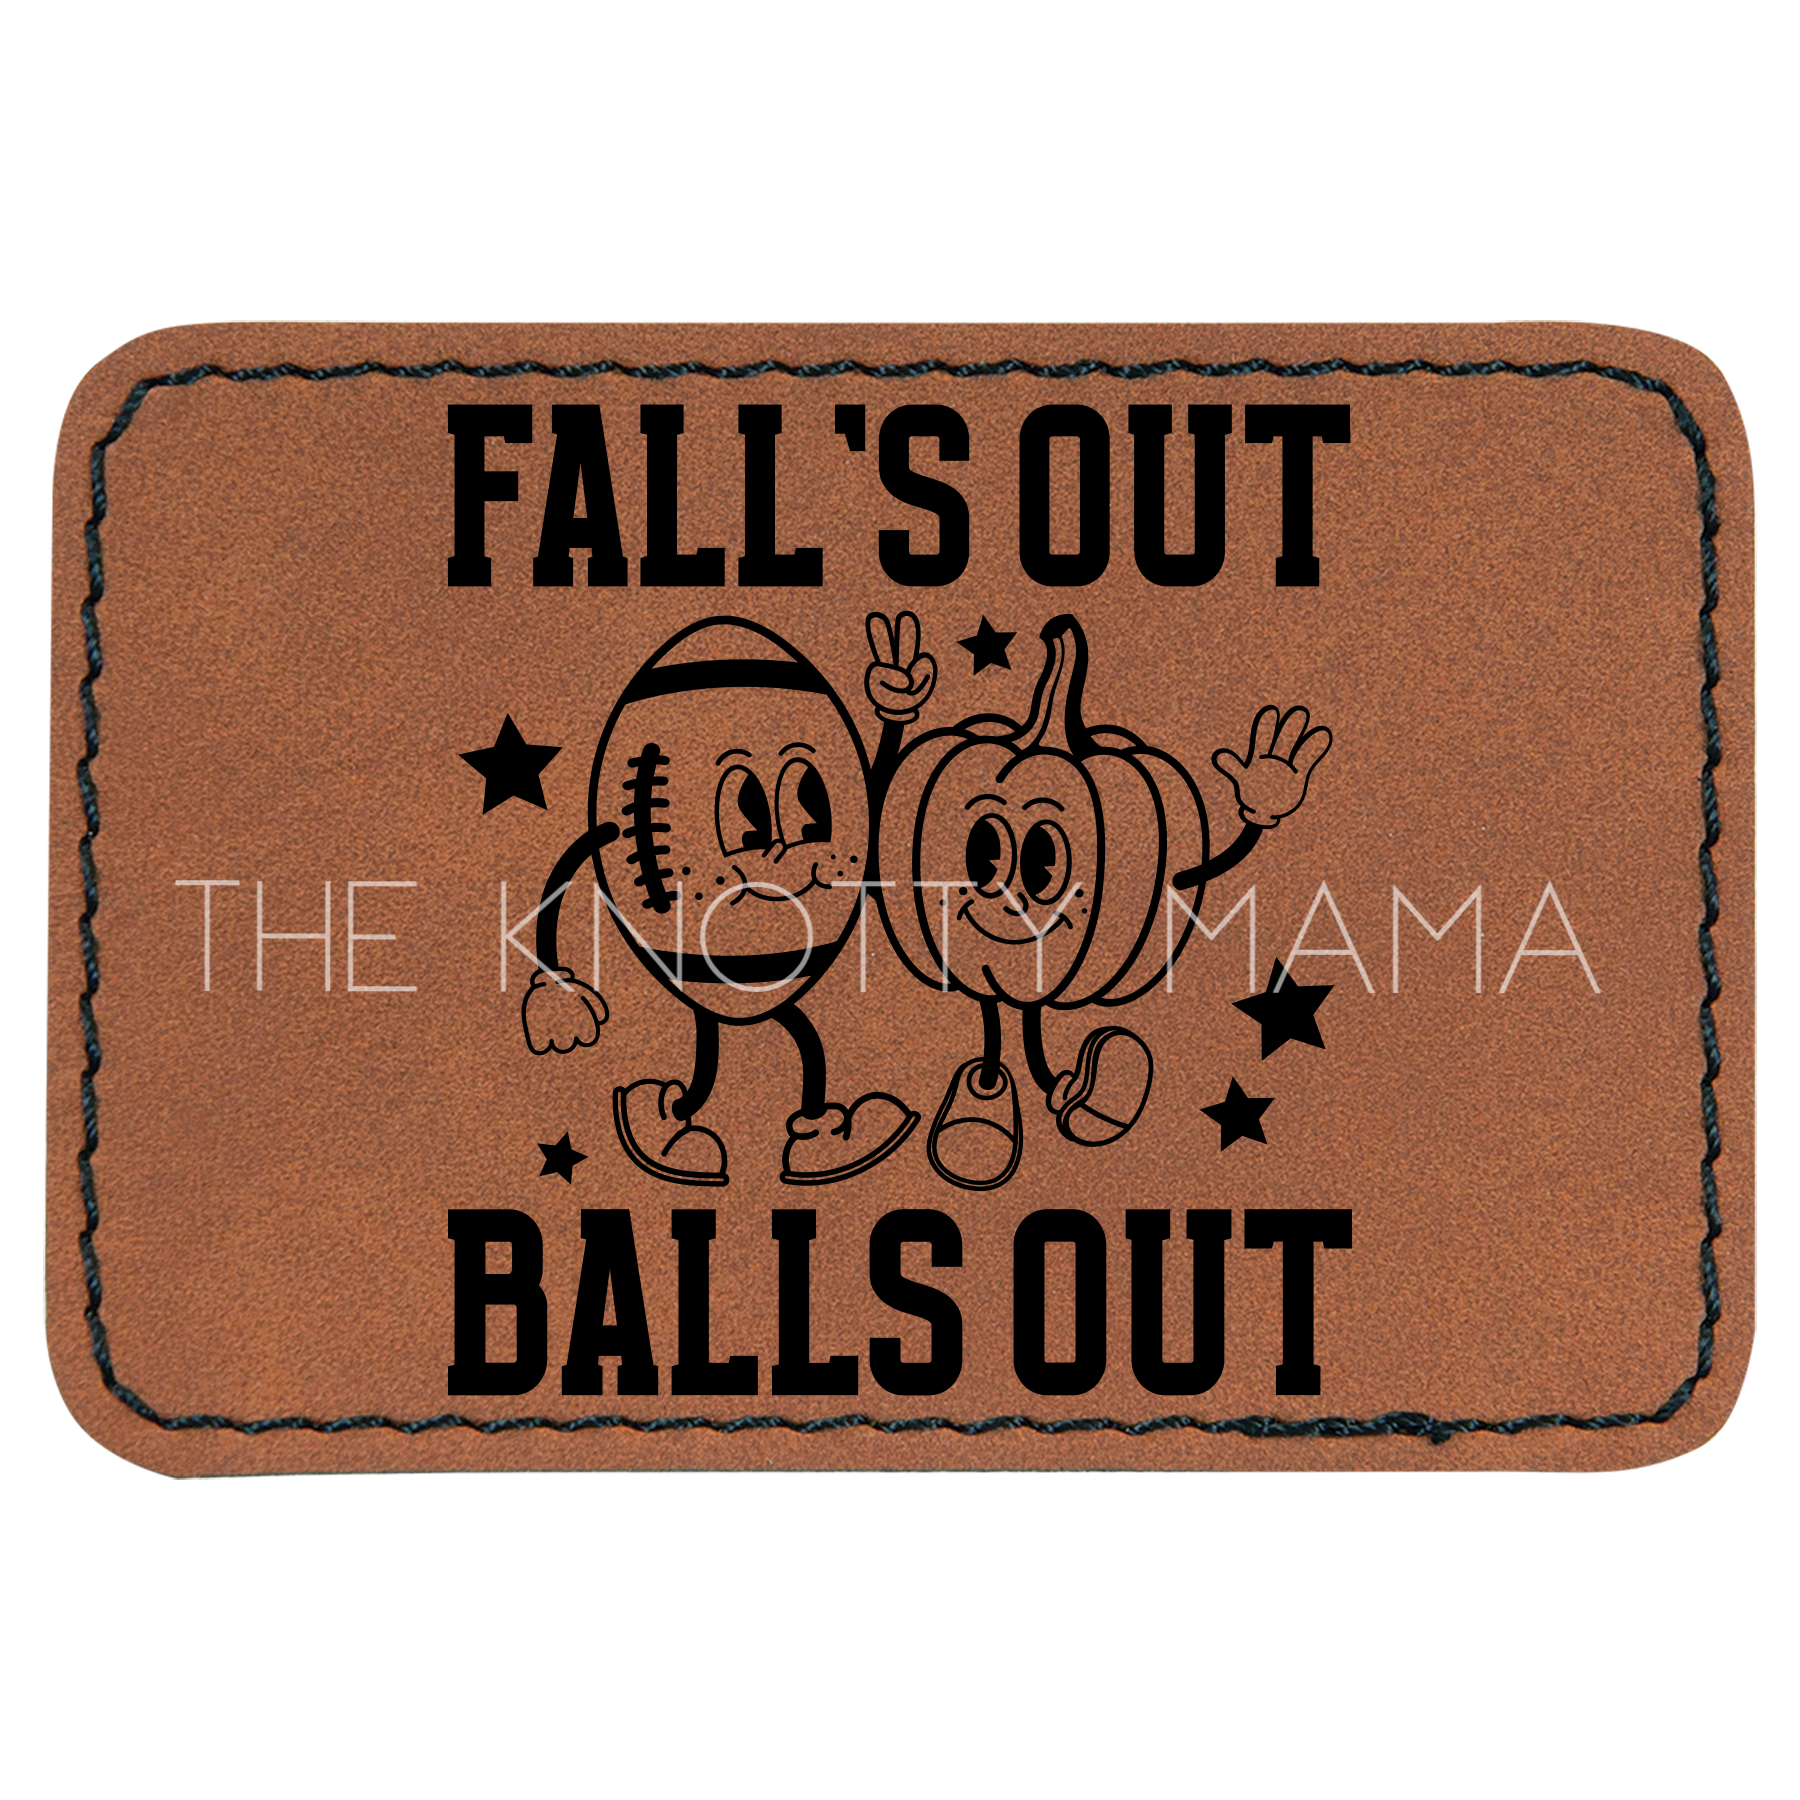 Falls Out Balls Out Patch